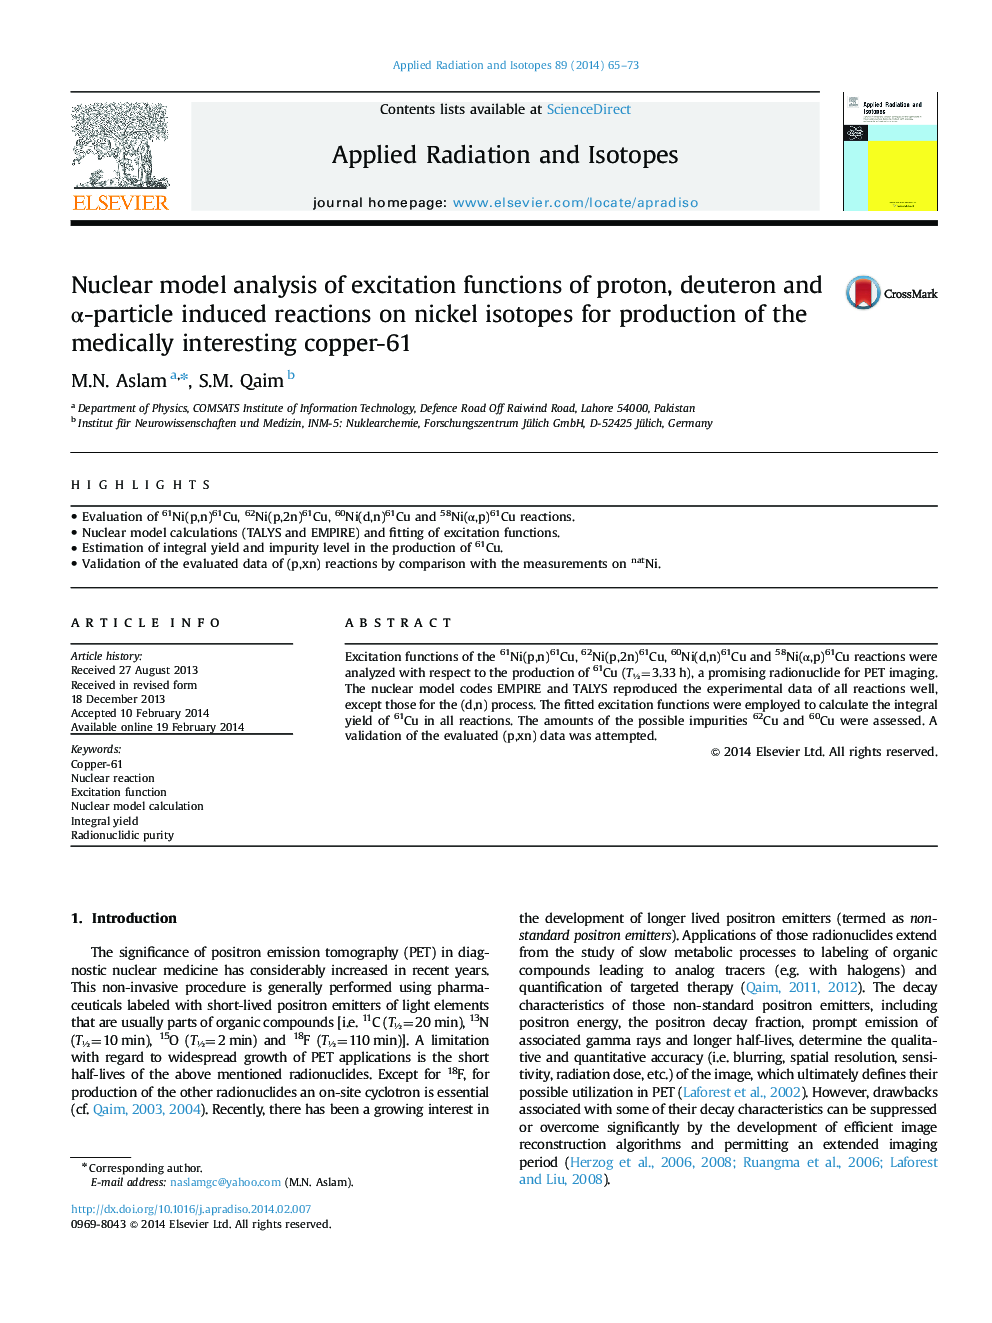 Nuclear model analysis of excitation functions of proton, deuteron and Î±-particle induced reactions on nickel isotopes for production of the medically interesting copper-61